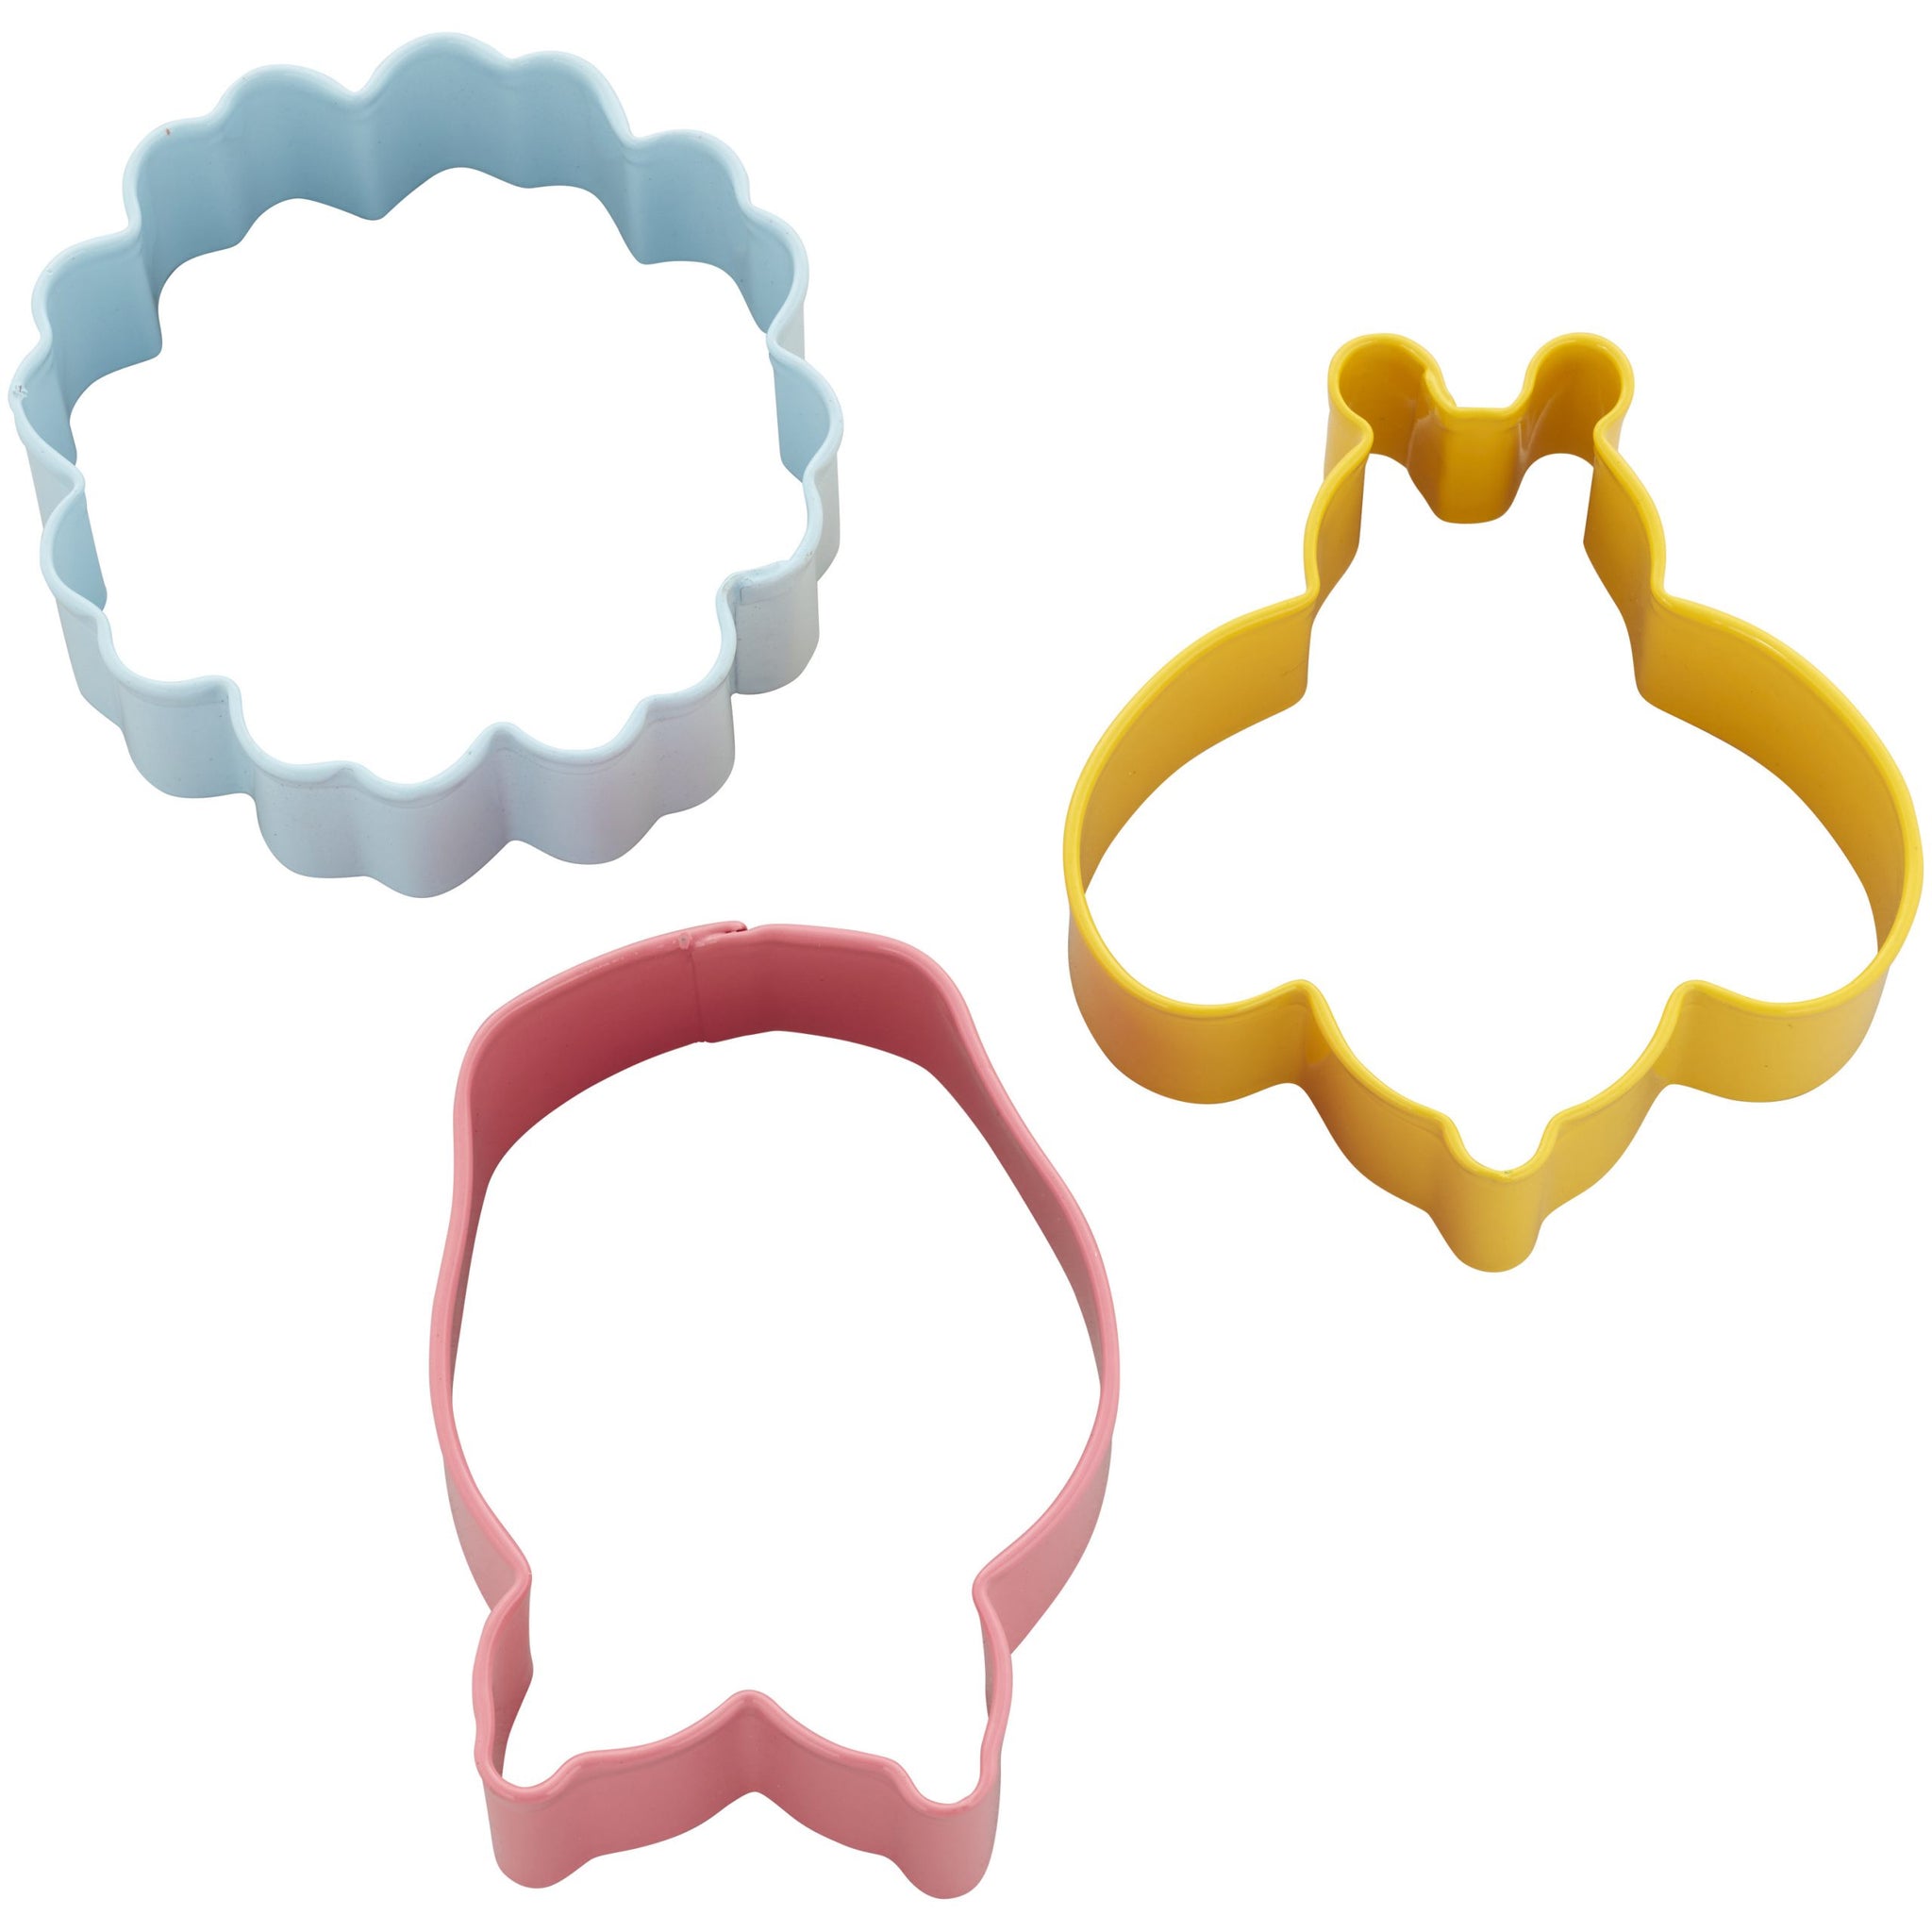 Wilton Flowers and Bee Cookie Cutter Set 3pc